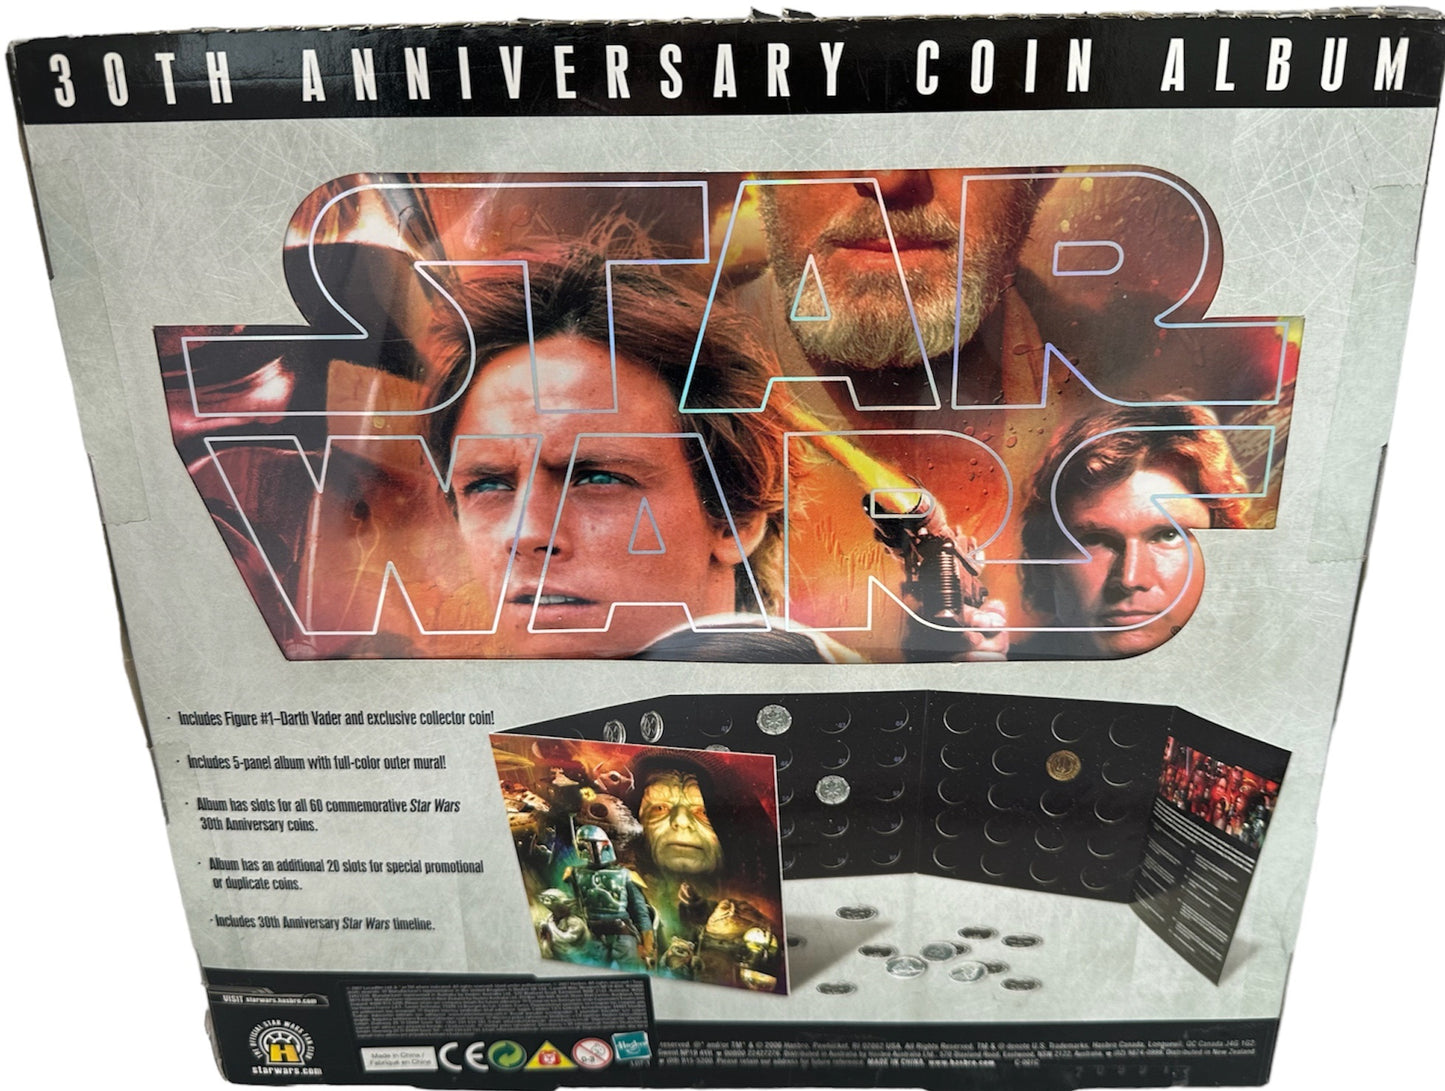 Vintage 2006 Star Saga Wars 30th Anniversary Coin Album With Exclusive No. 1 Darth Vader Action Figure With Exclusive Collector Coin - Brand New Factory Sealed Shop Stock Room Find